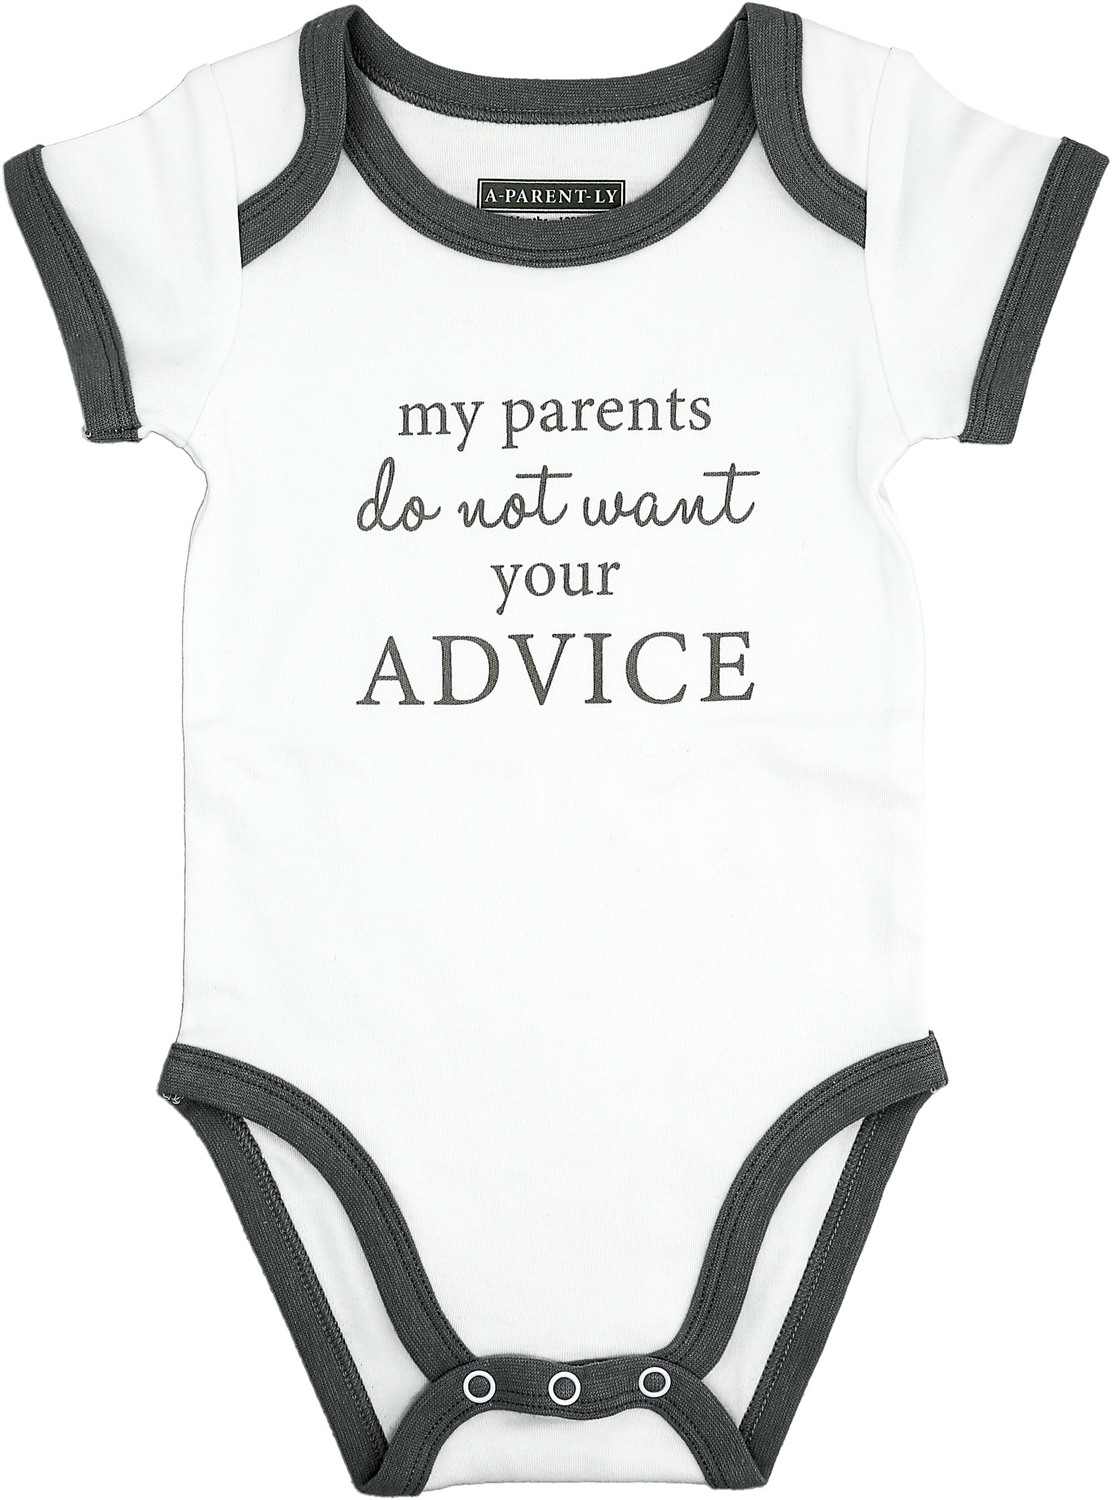 Advice by A-Parent-ly - Advice - 6-12 Months Gray Trimmed Bodysuit